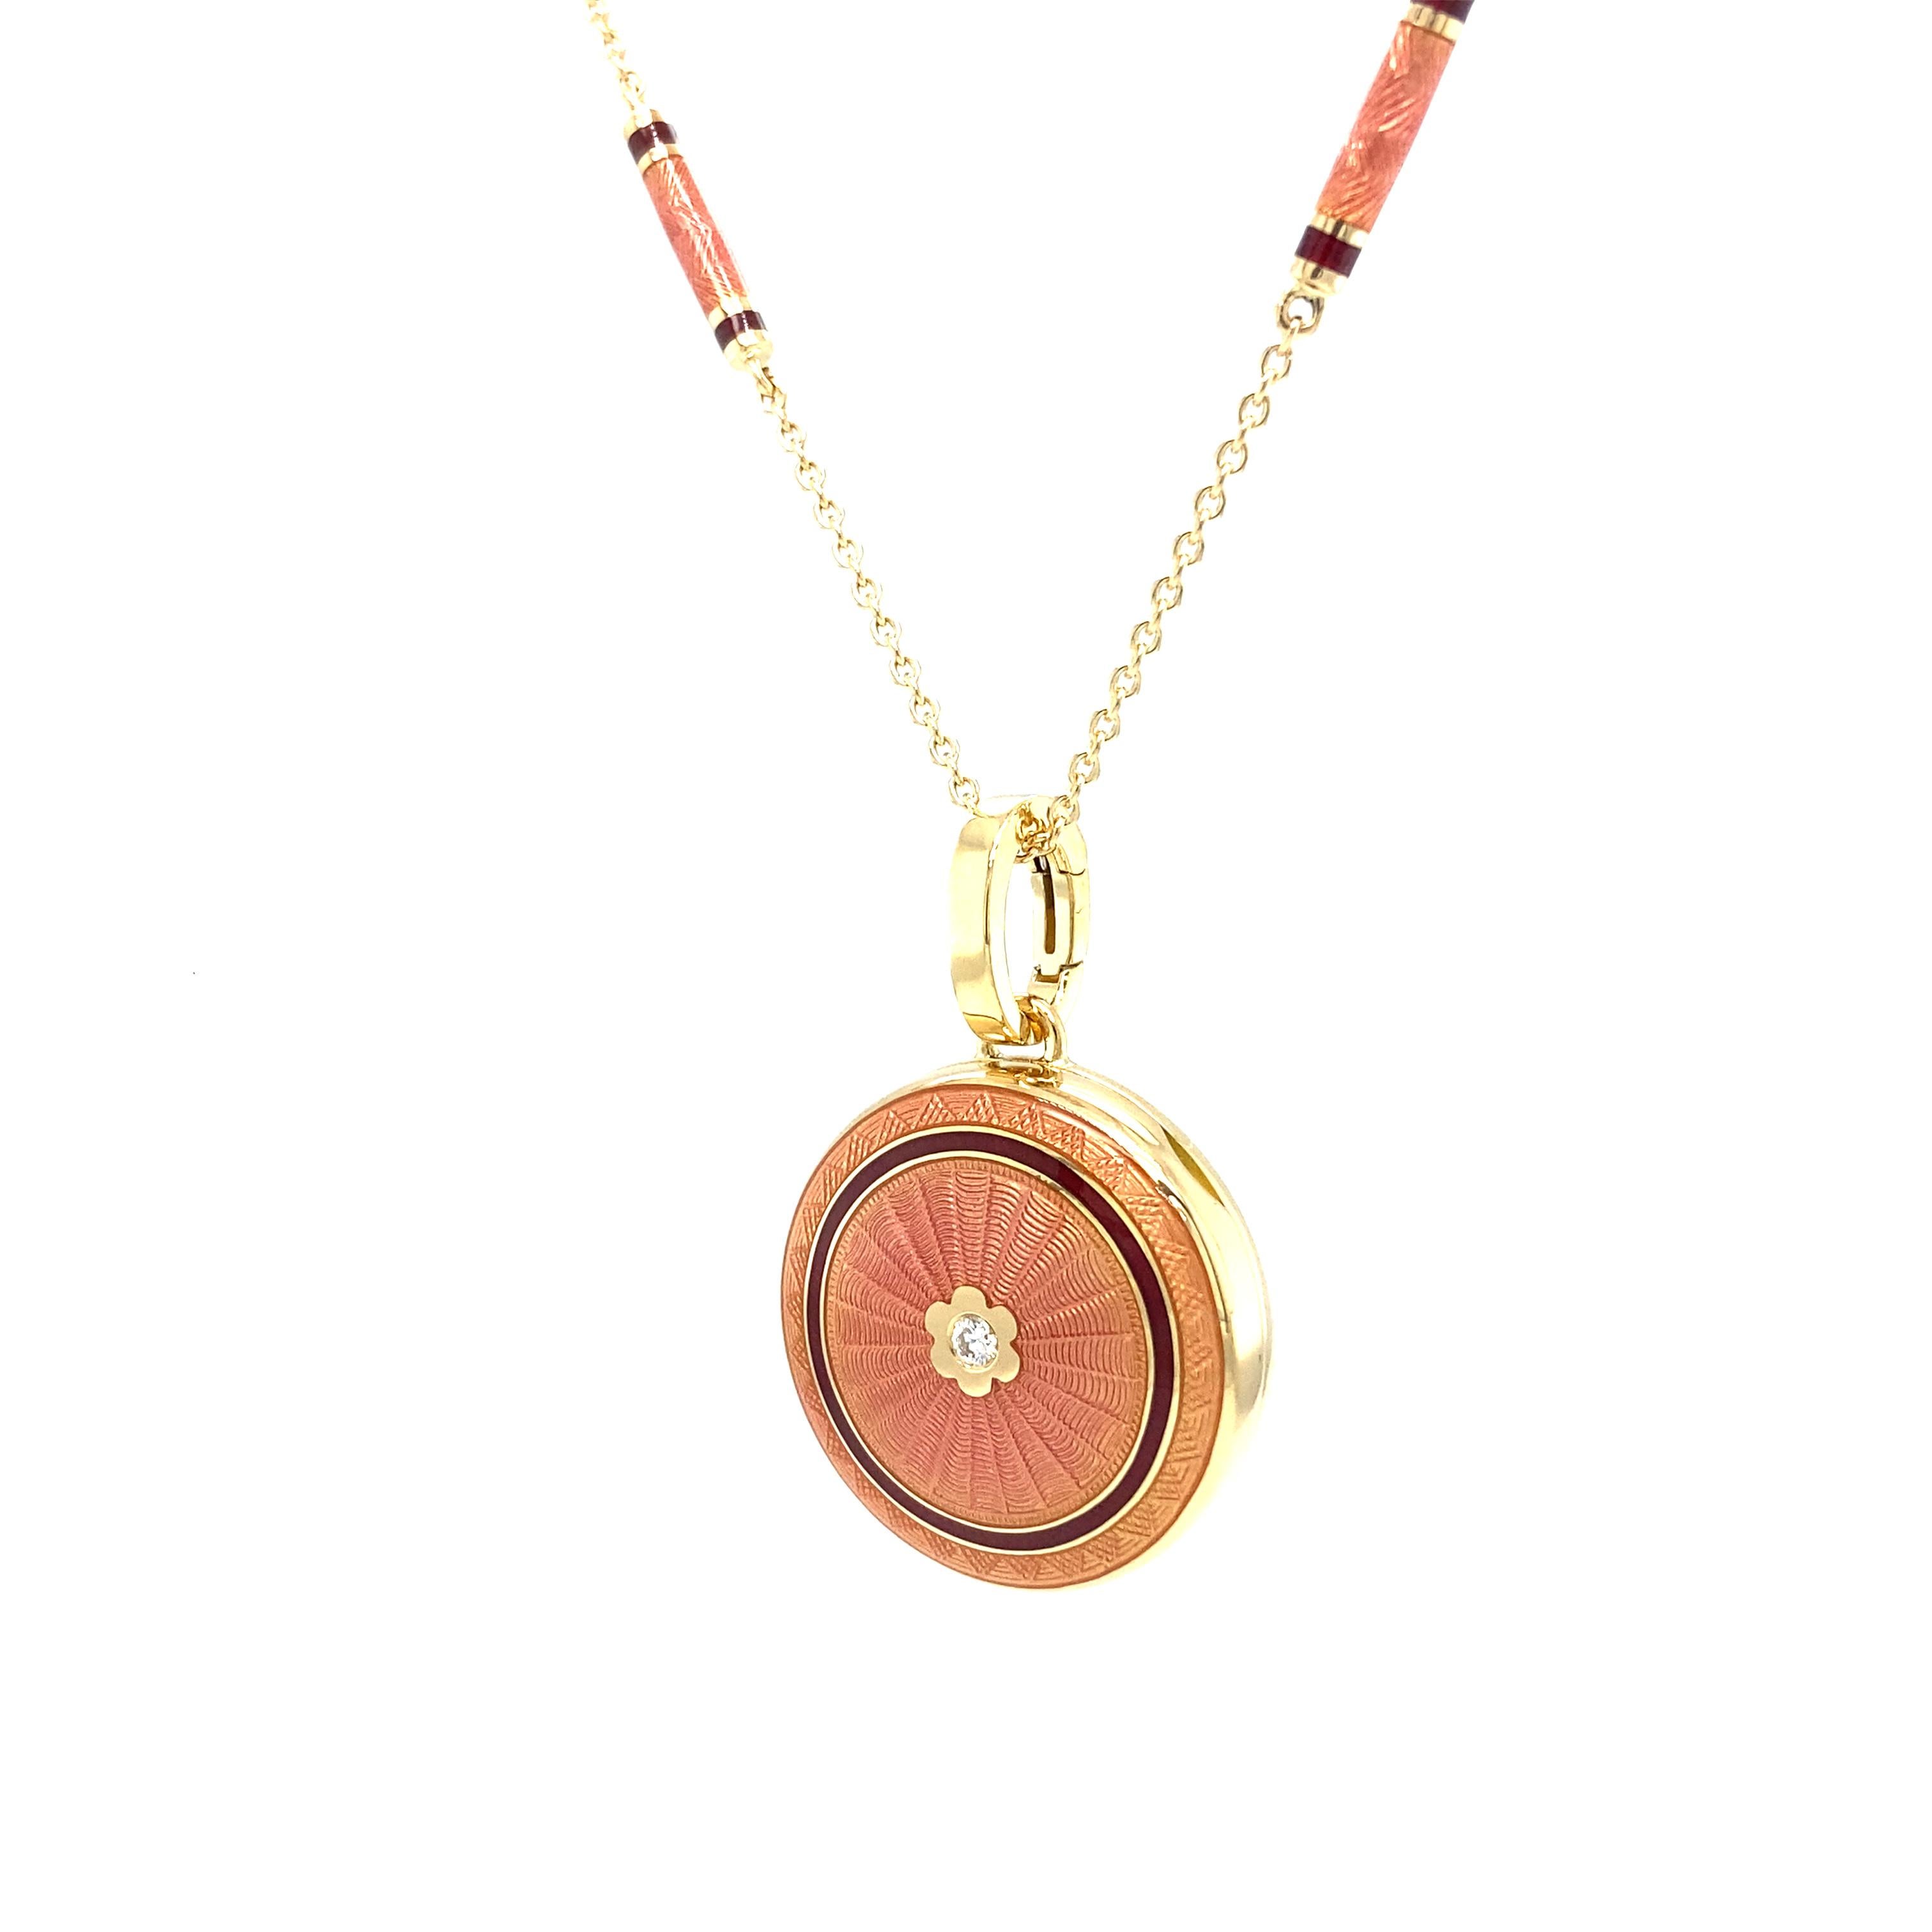 Victor Mayer round locket pendant in 18k yellow gold with pink and burgundy red vitreous enamel and 1 brilliant cut diamond 0.03 ct, H VS

About the creator Victor Mayer 
Victor Mayer is internationally renowned for elegant timeless designs and